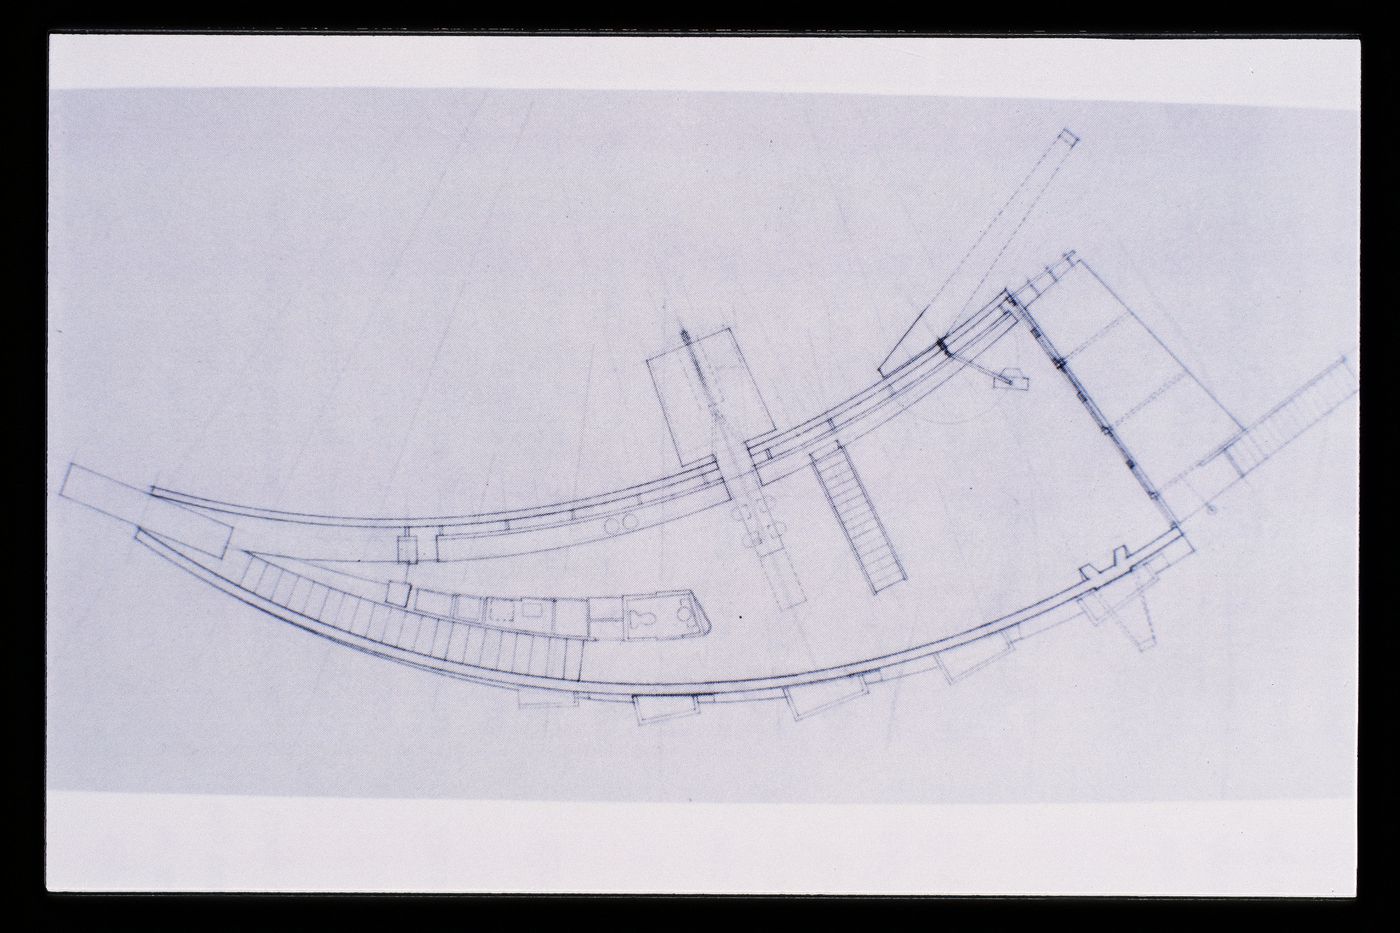 Slide of a drawing for Slow House, Long Island, by Diller + Scofidio